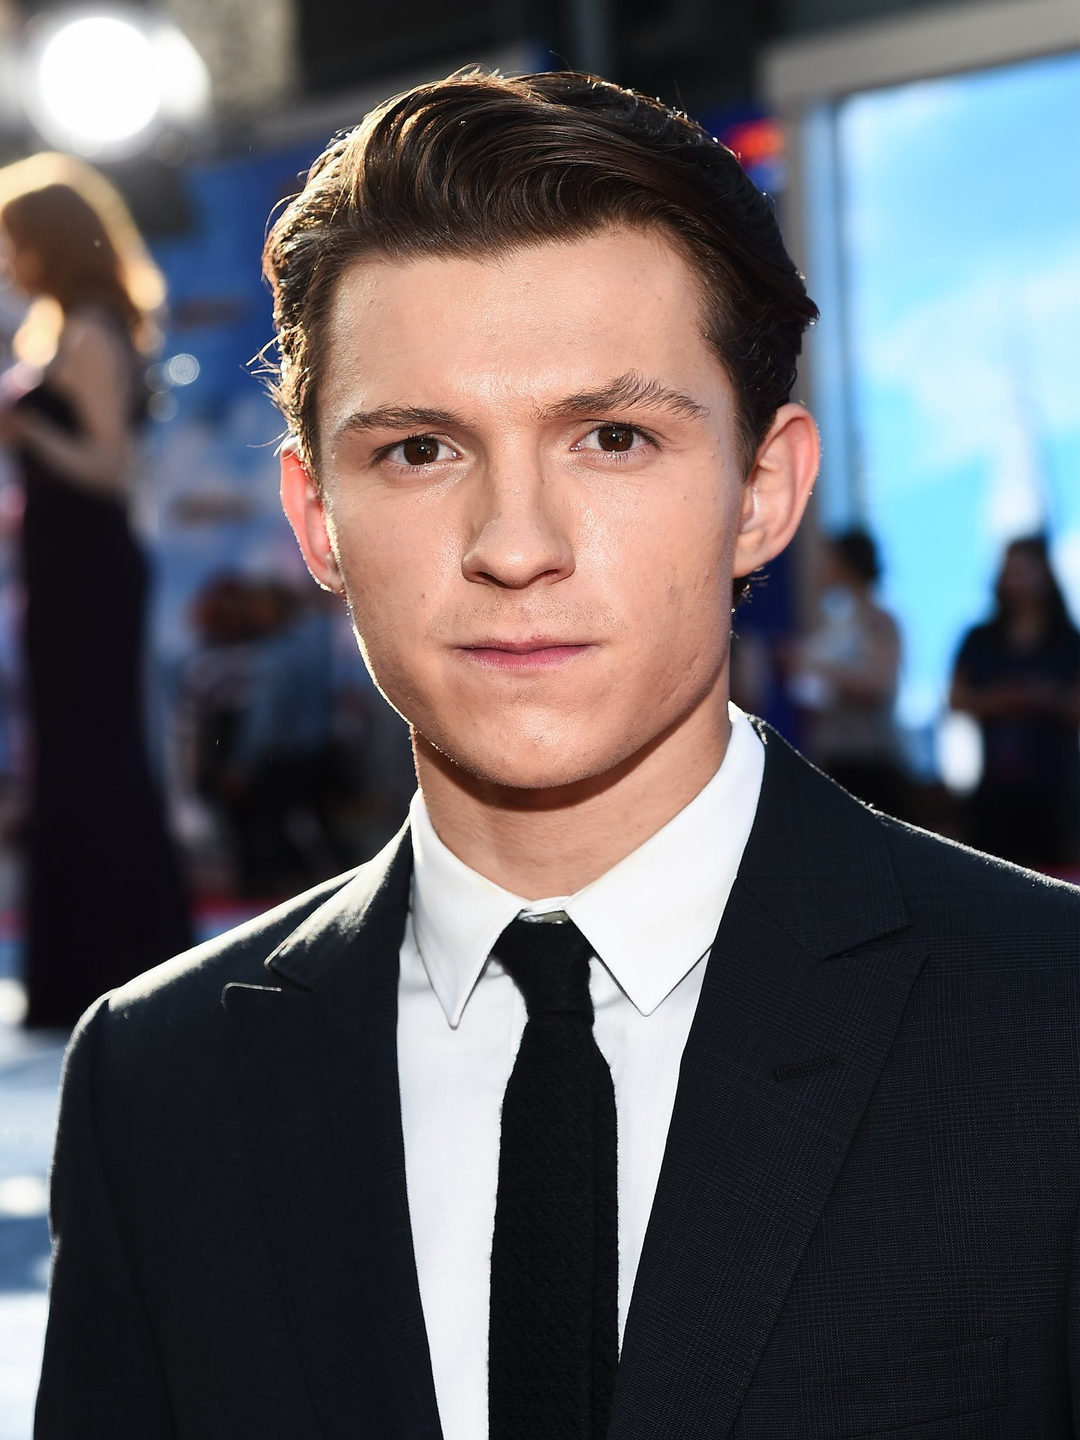 Tom Holland does he have kids